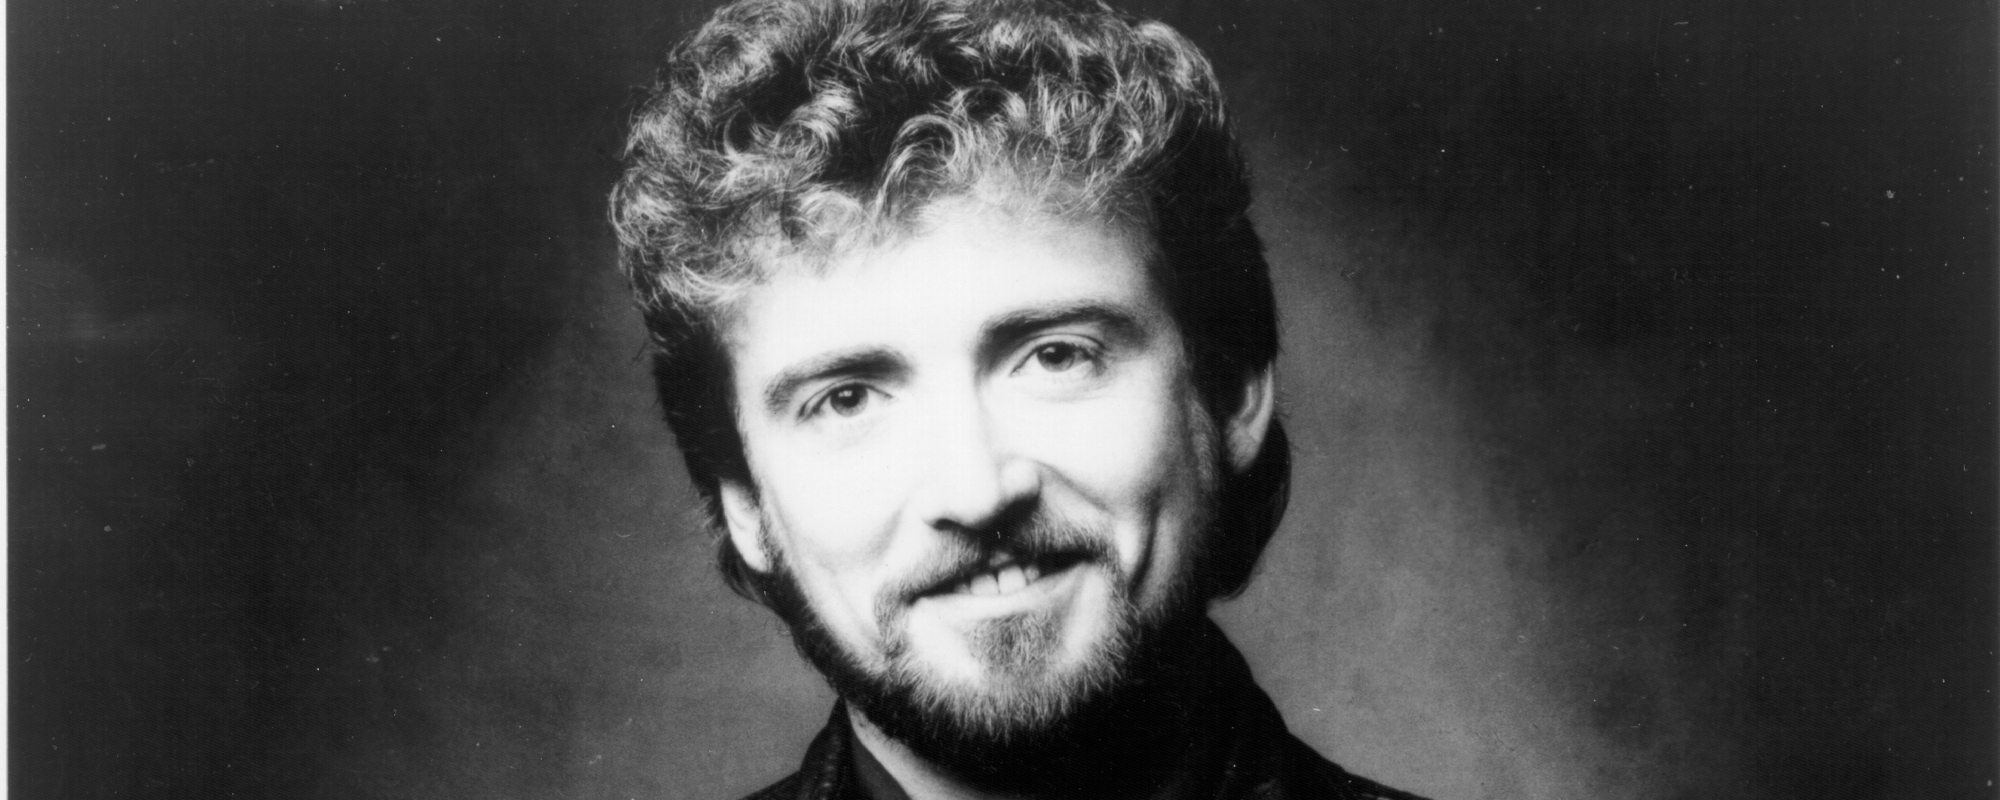 The Meaning Behind Keith Whitley’s No. 1 Hit “Don’t Close Your Eyes”